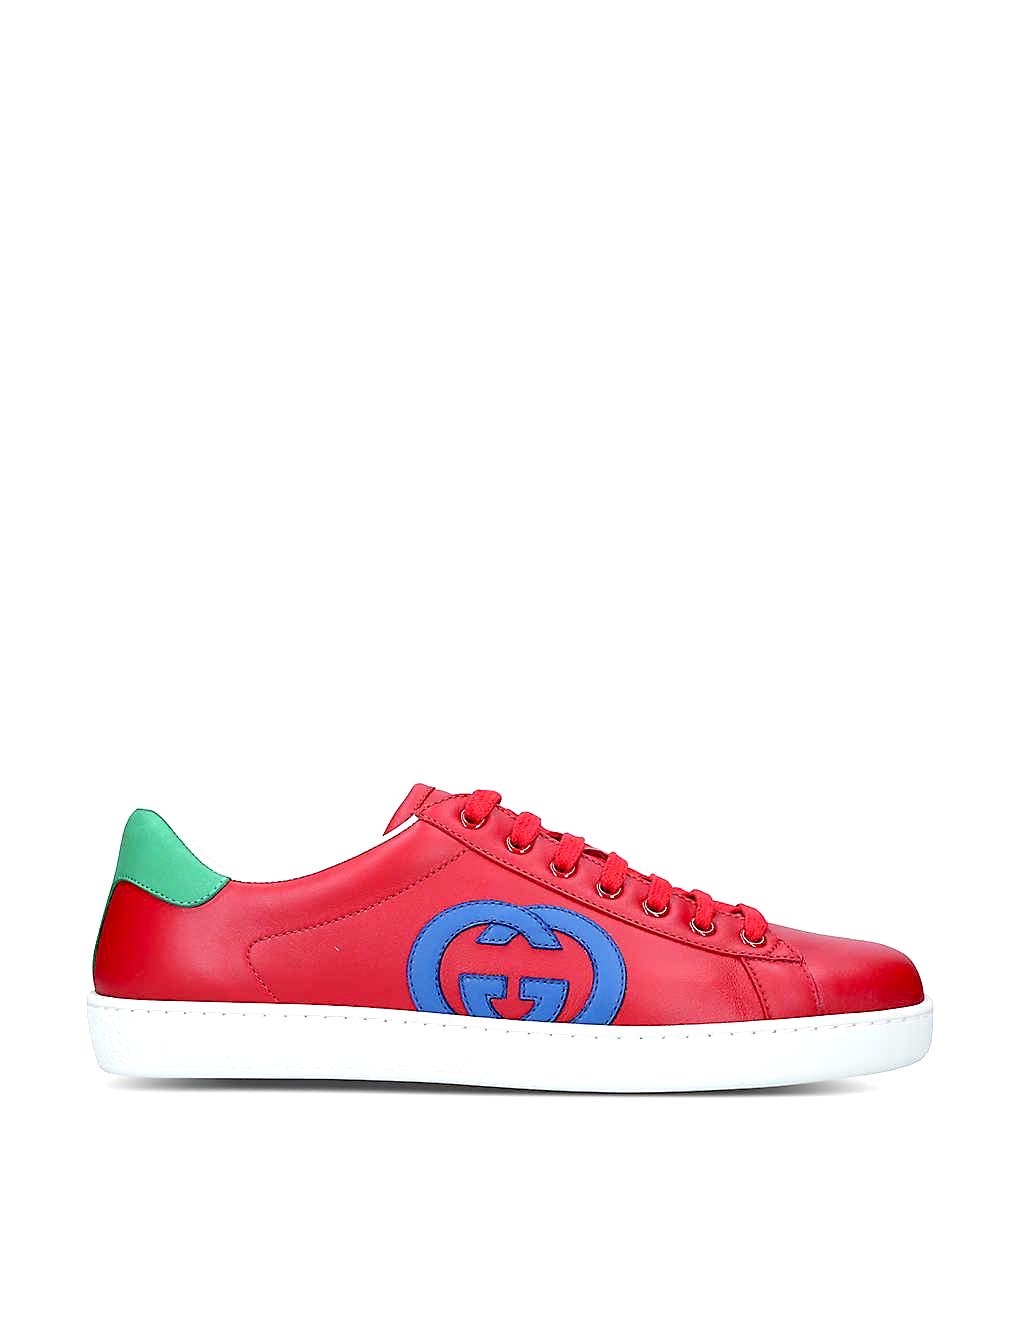 Gucci Red Comb Ace Colour-blocked Leather Mid-top Sneakers